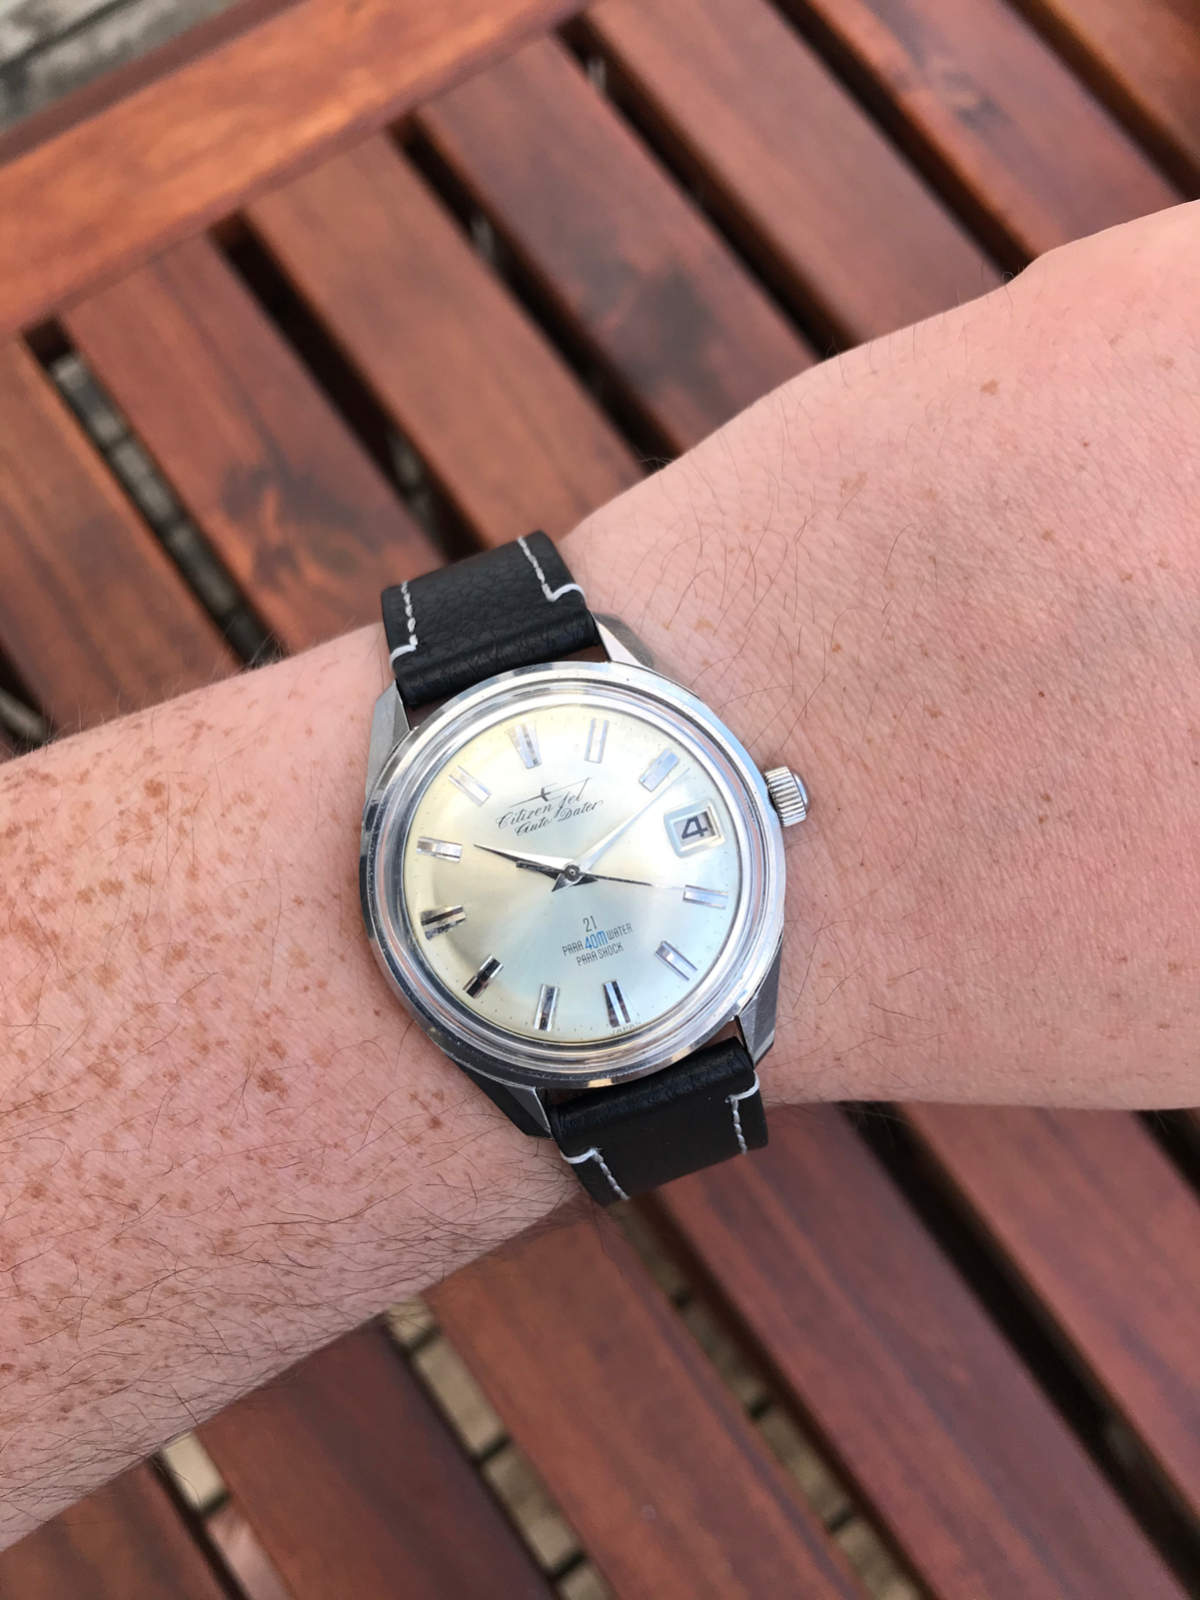 Owner Review: Citizen Jet Auto Dater